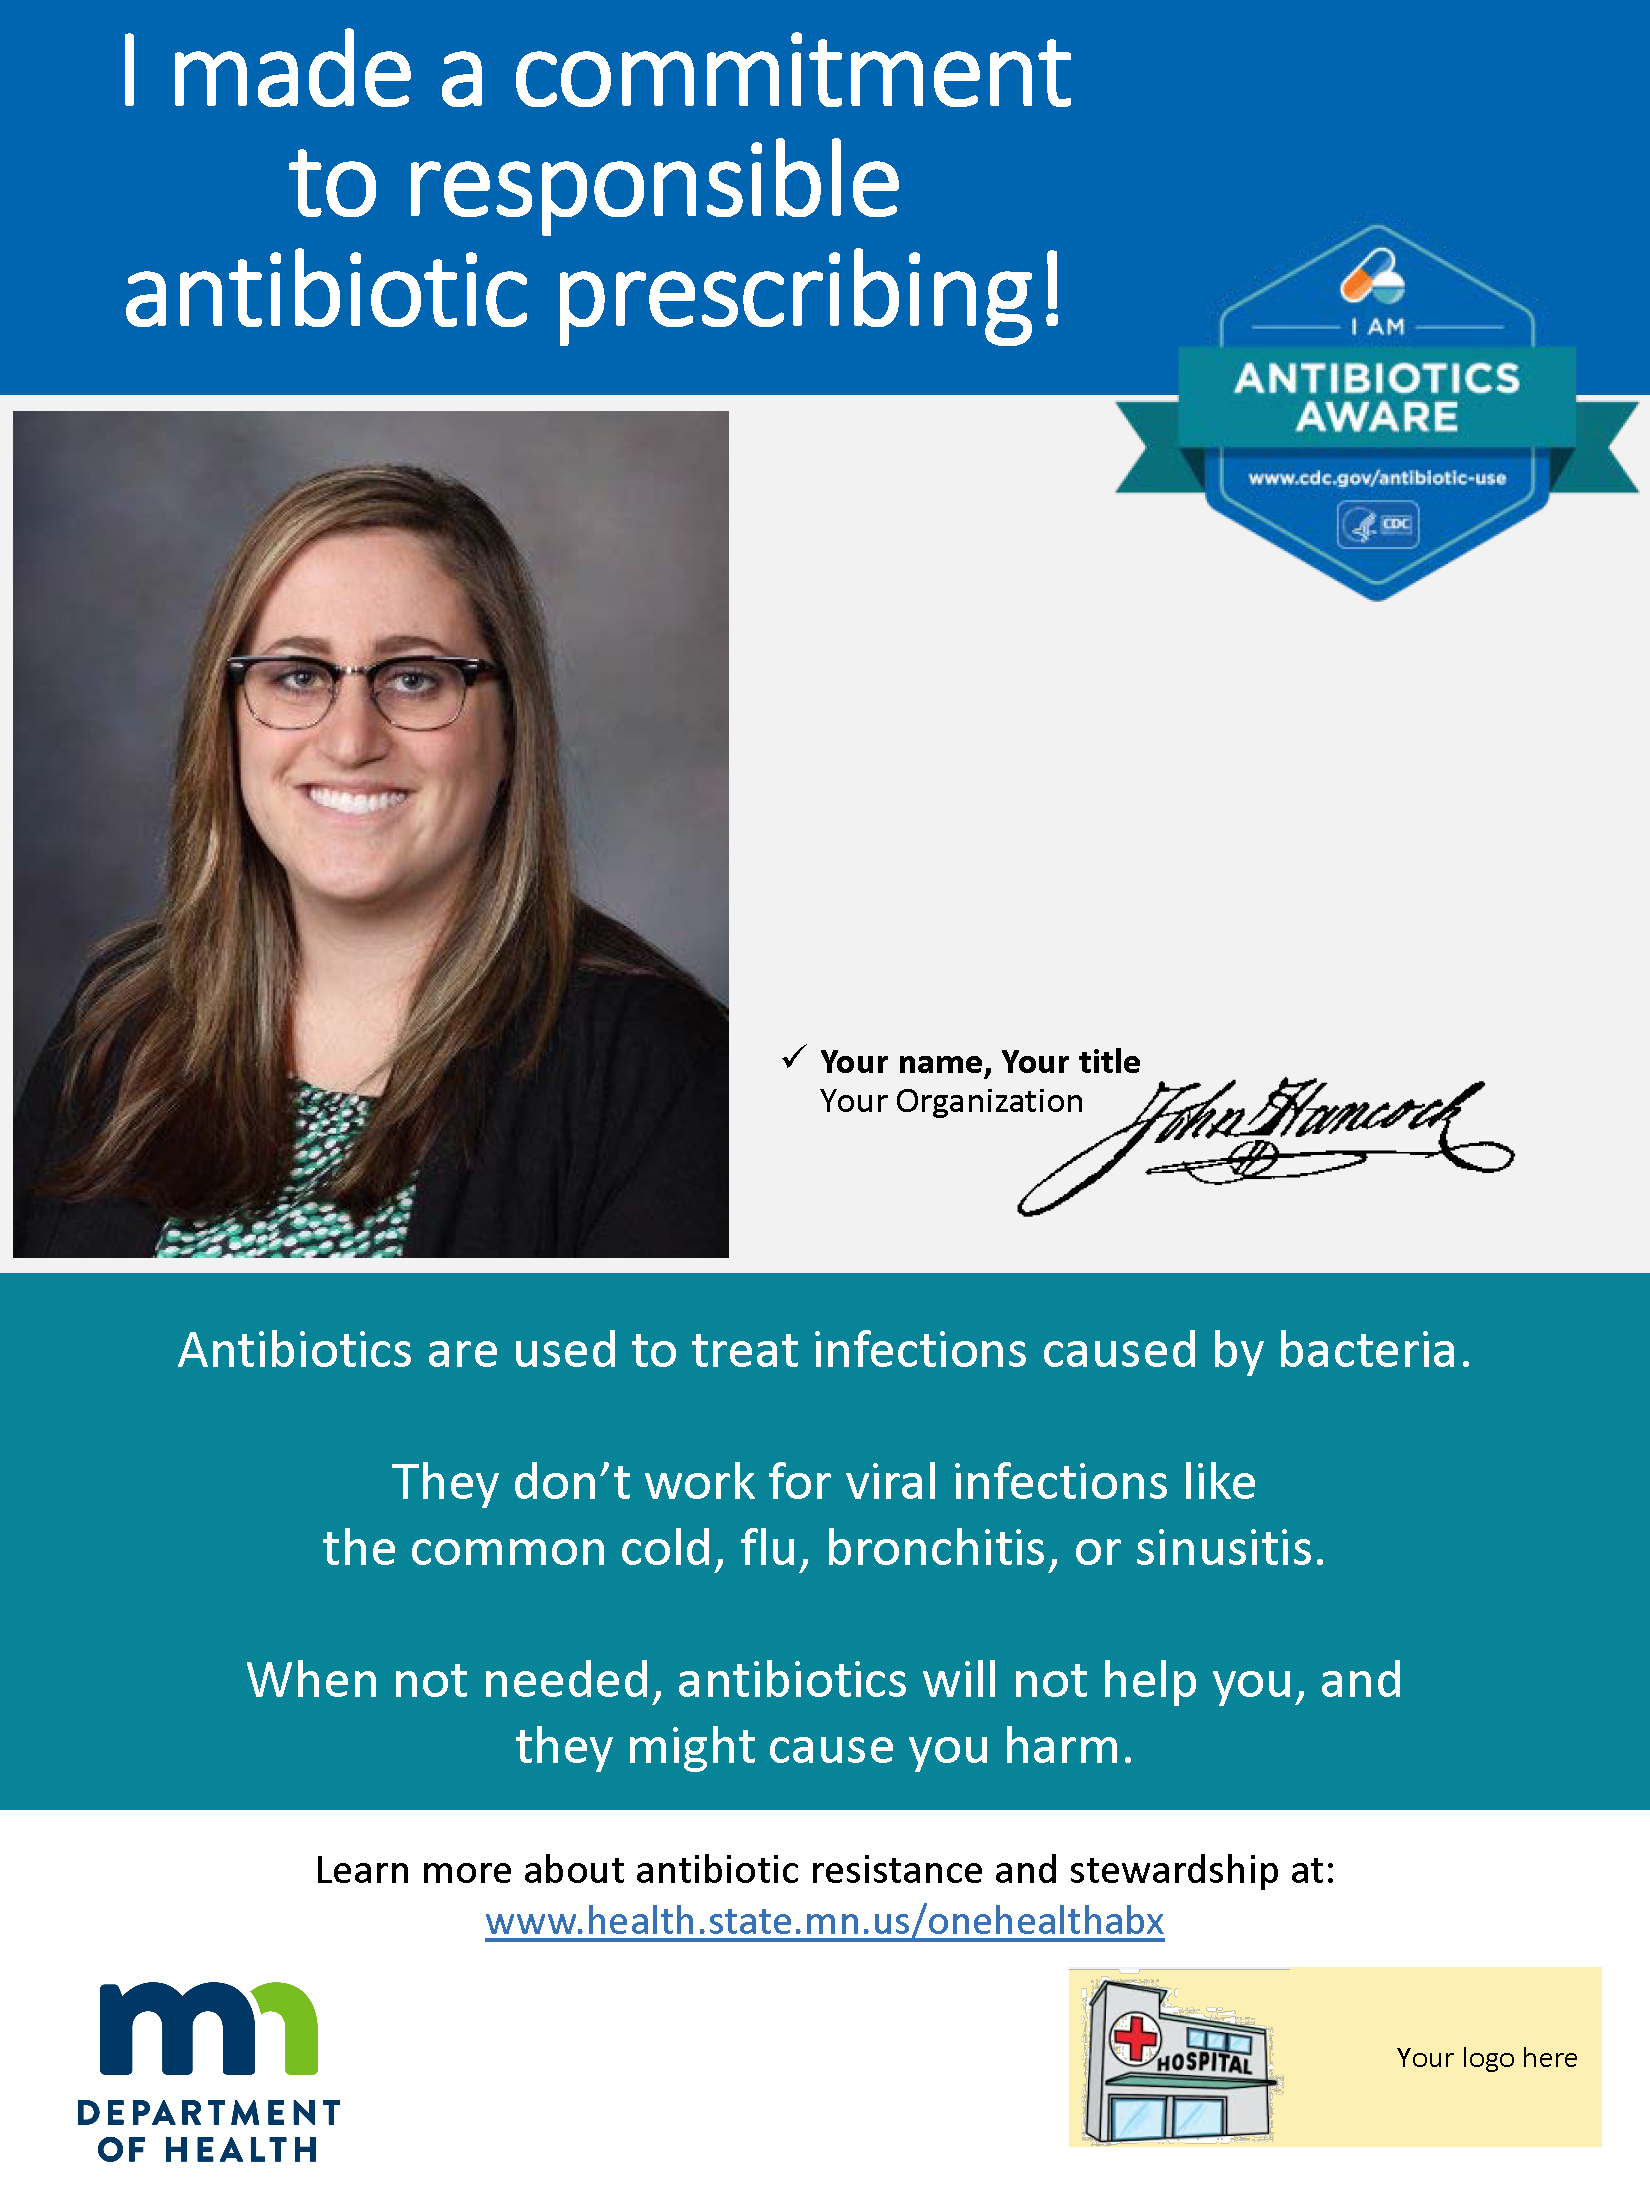 Poster template: I have made a commitment to responsible antibiotic prescribing!